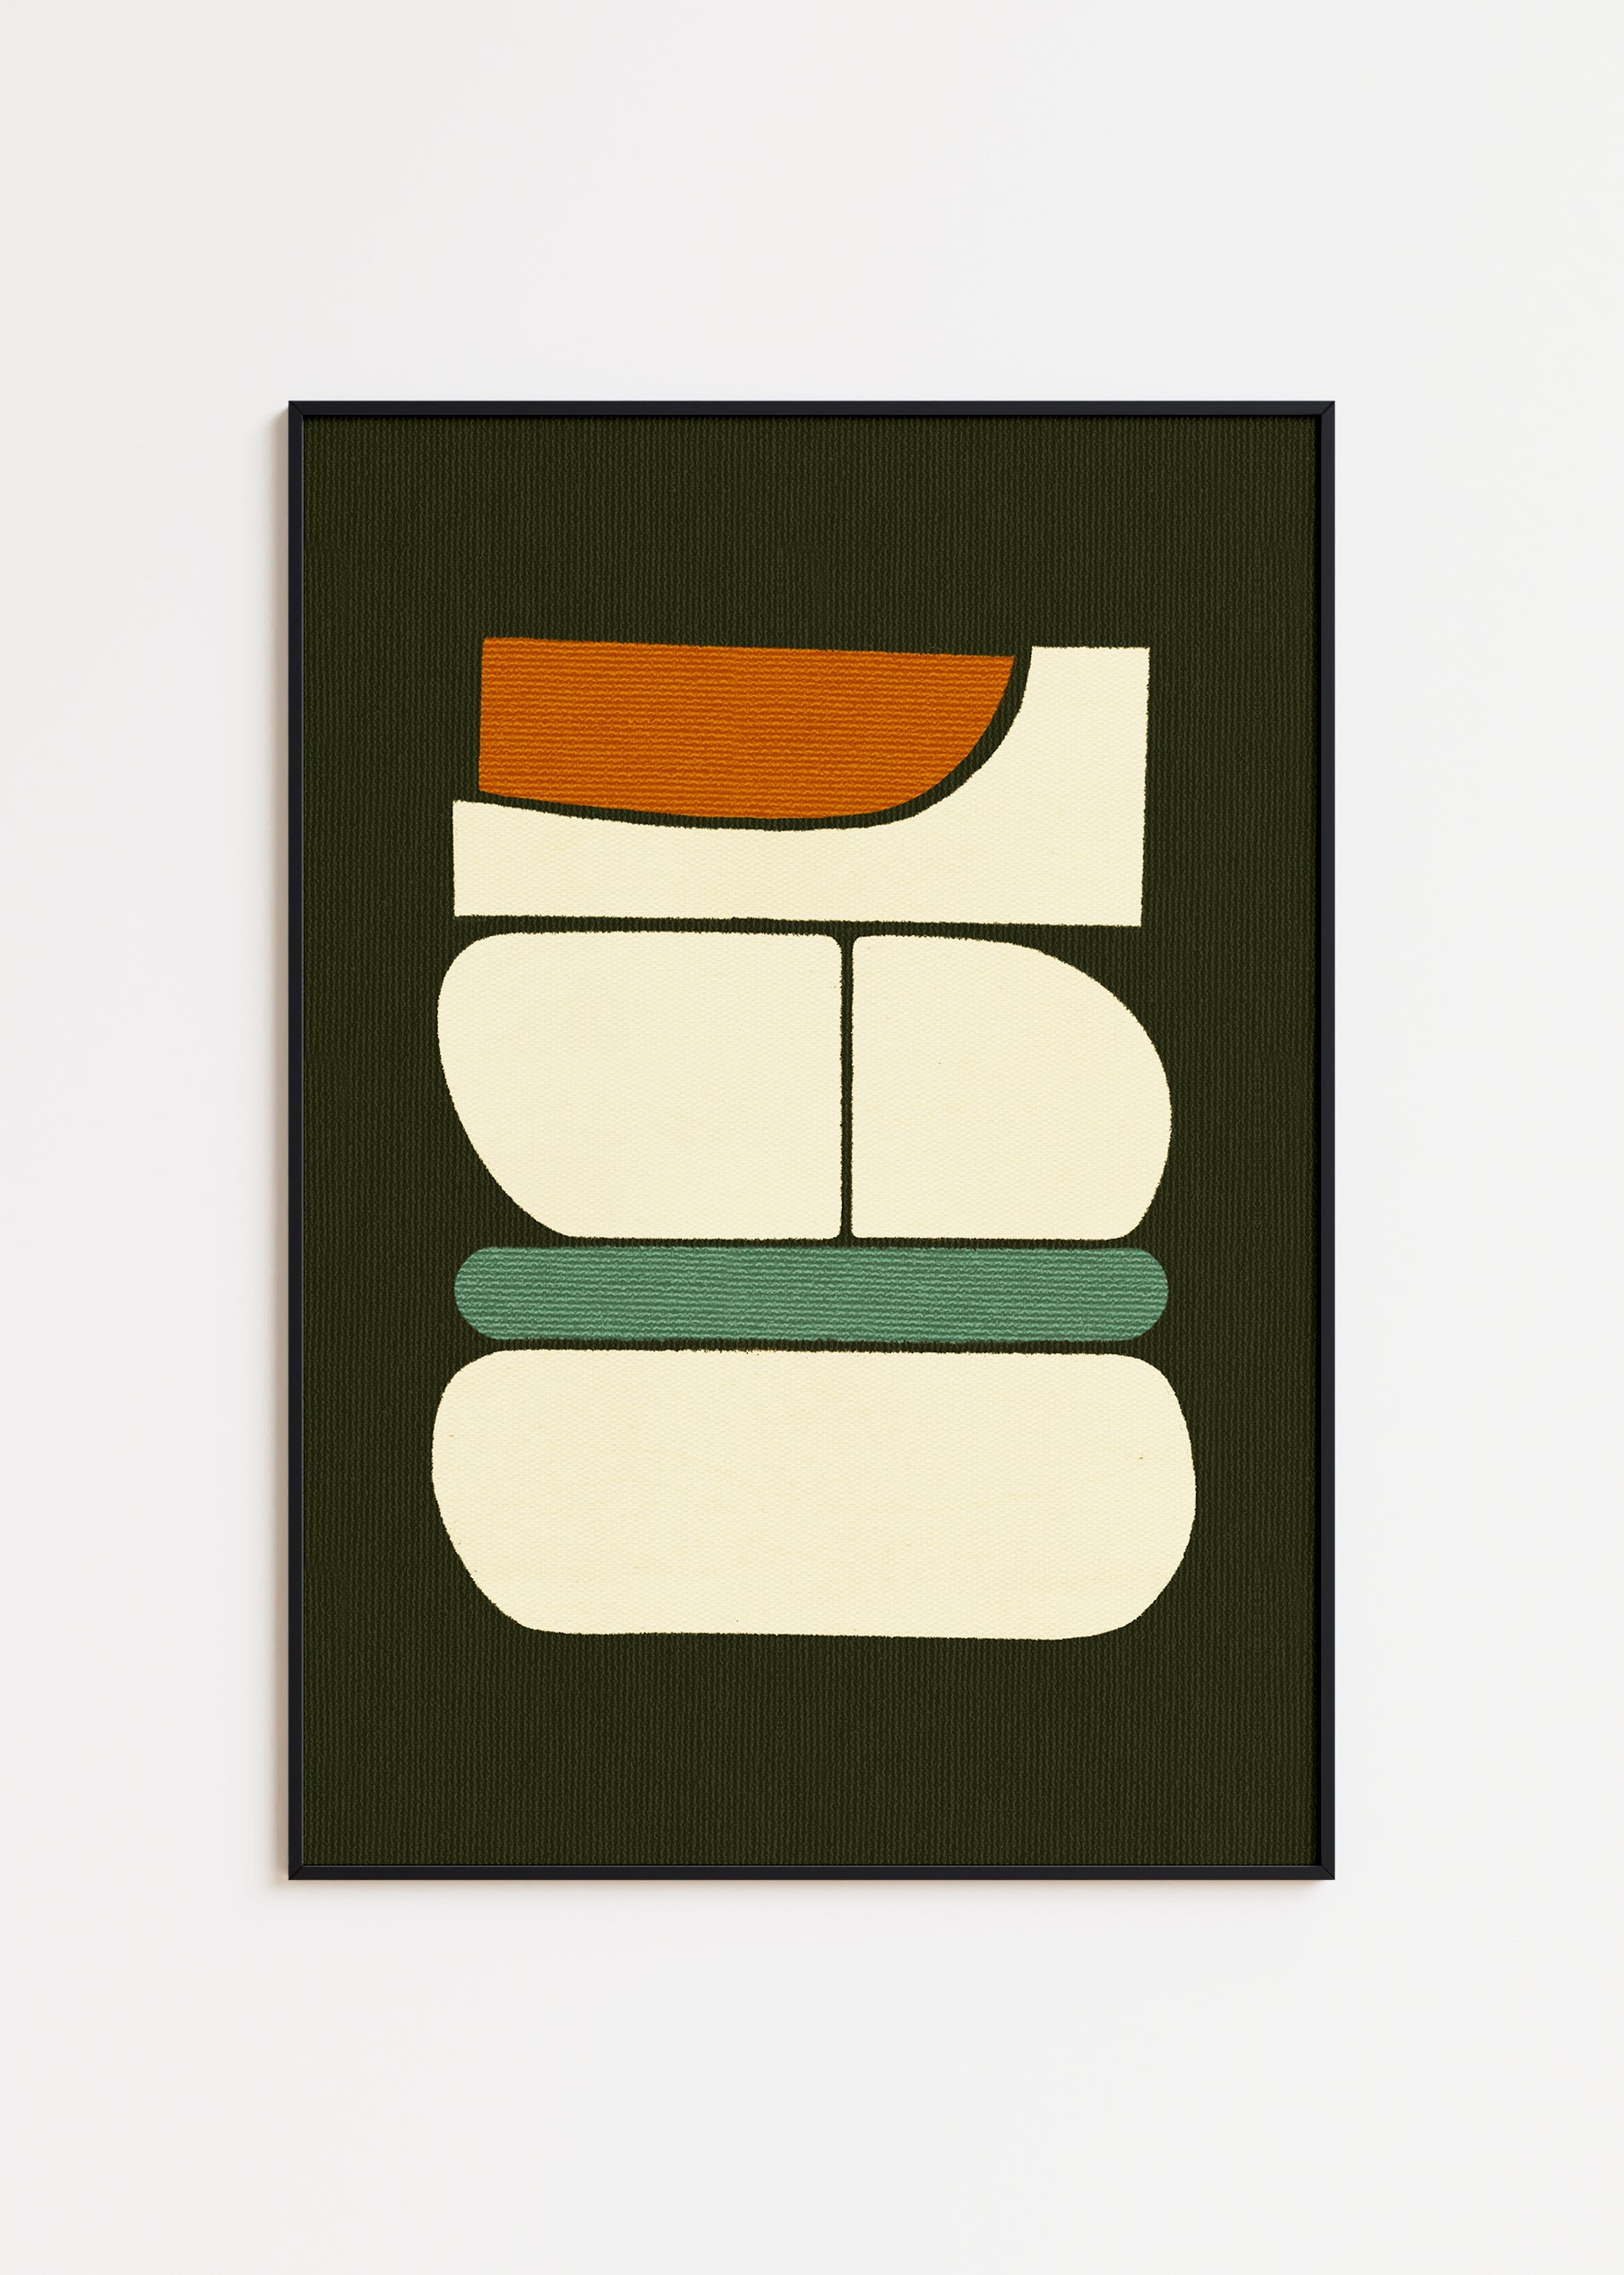 Colorful digital modern art print that uses organic floating forms inspired in architecture and sculpture techniques to create a minimalist composition for your interior design and home wall decor projects.  Colors: green, ochre, turquoise, cream Available in sizes (inches): 8x10, 12x16, 16x20, 18x24, 20x28, 24x32, A1, 24x36, 30x40